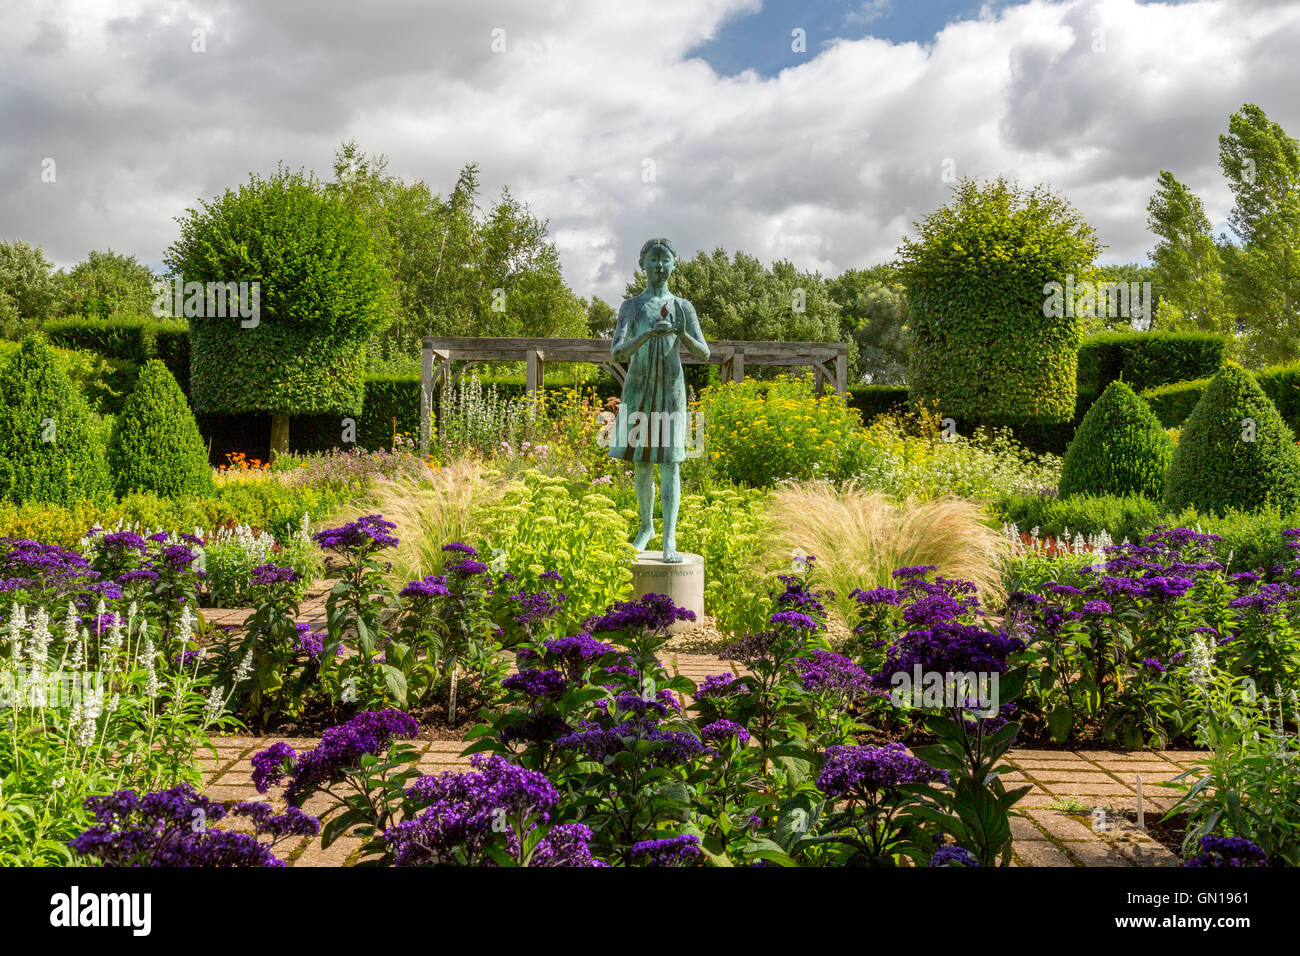 The Silent Space Garden at Waterperry containing Nathan David's sculpture 'Girl holding The Lamp of Wisdom', Oxfordshire, UK Stock Photo